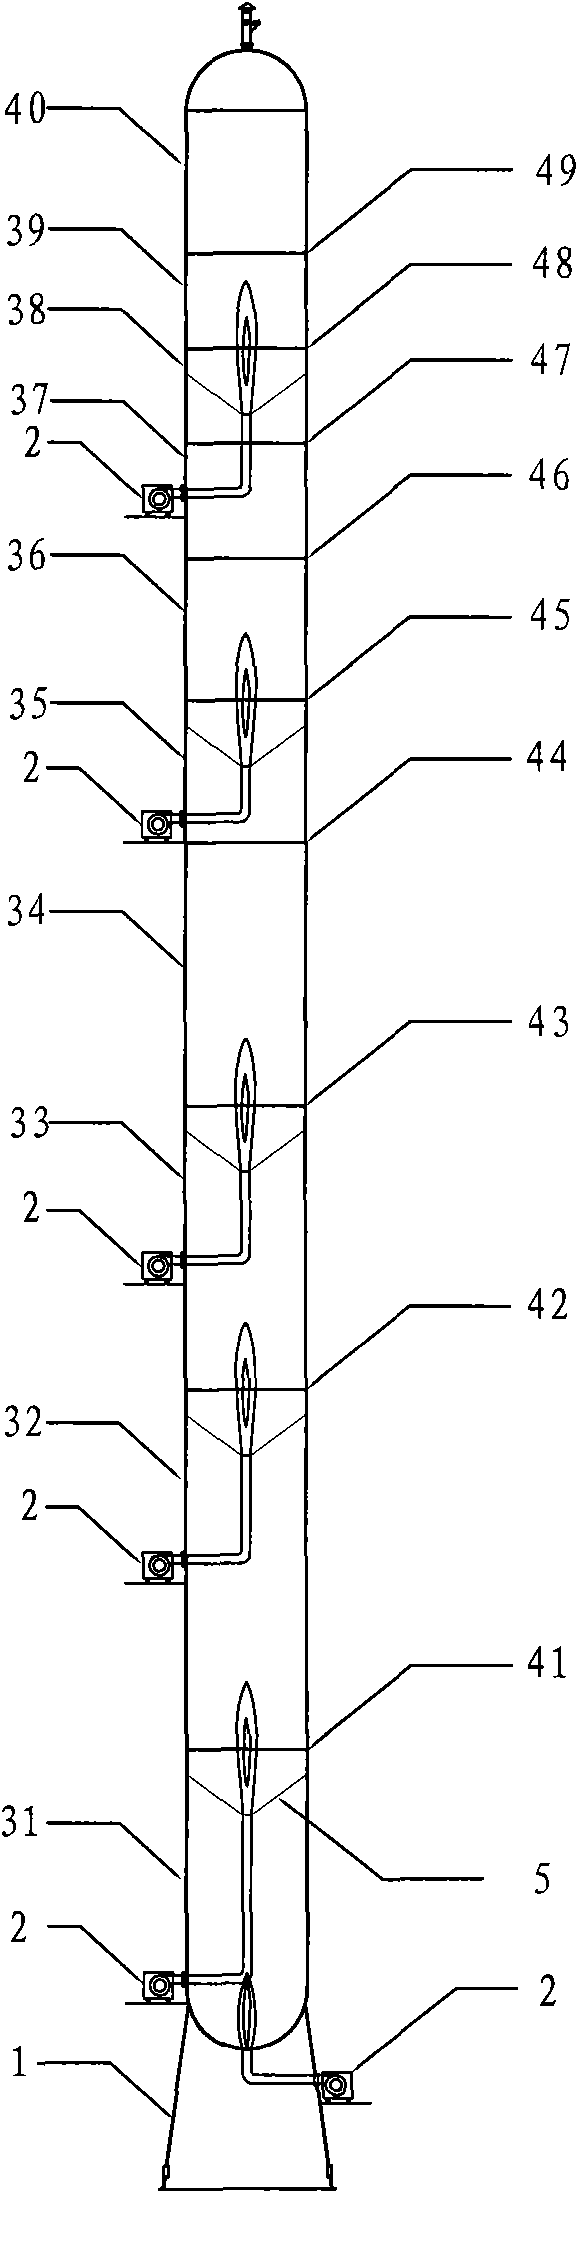 In-situ piecewise heat treatment method of large pressure container